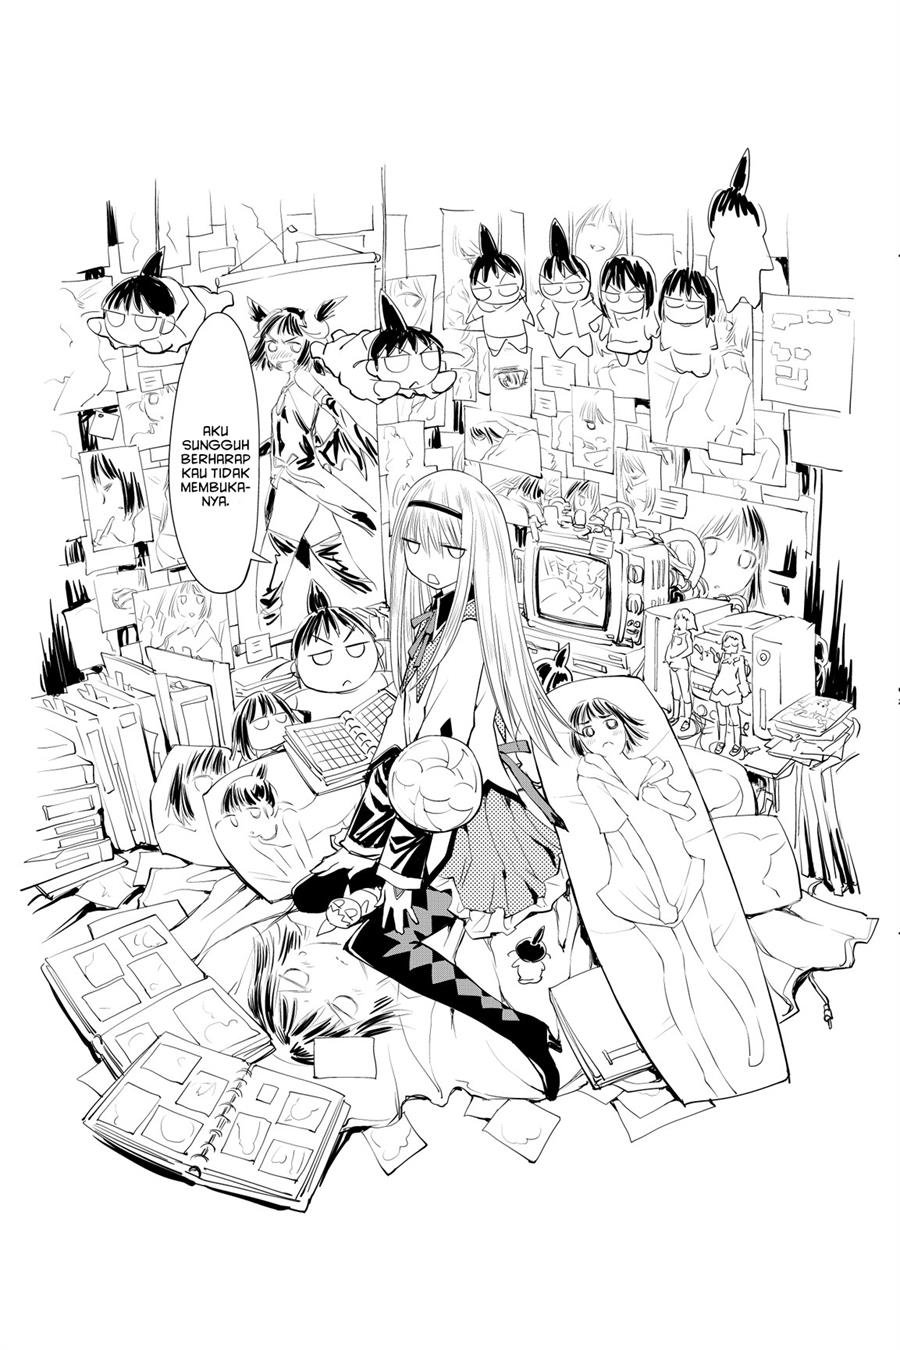 Genshiken – The Society for the Study of Modern Visual Culture Chapter 67.5 Image 2